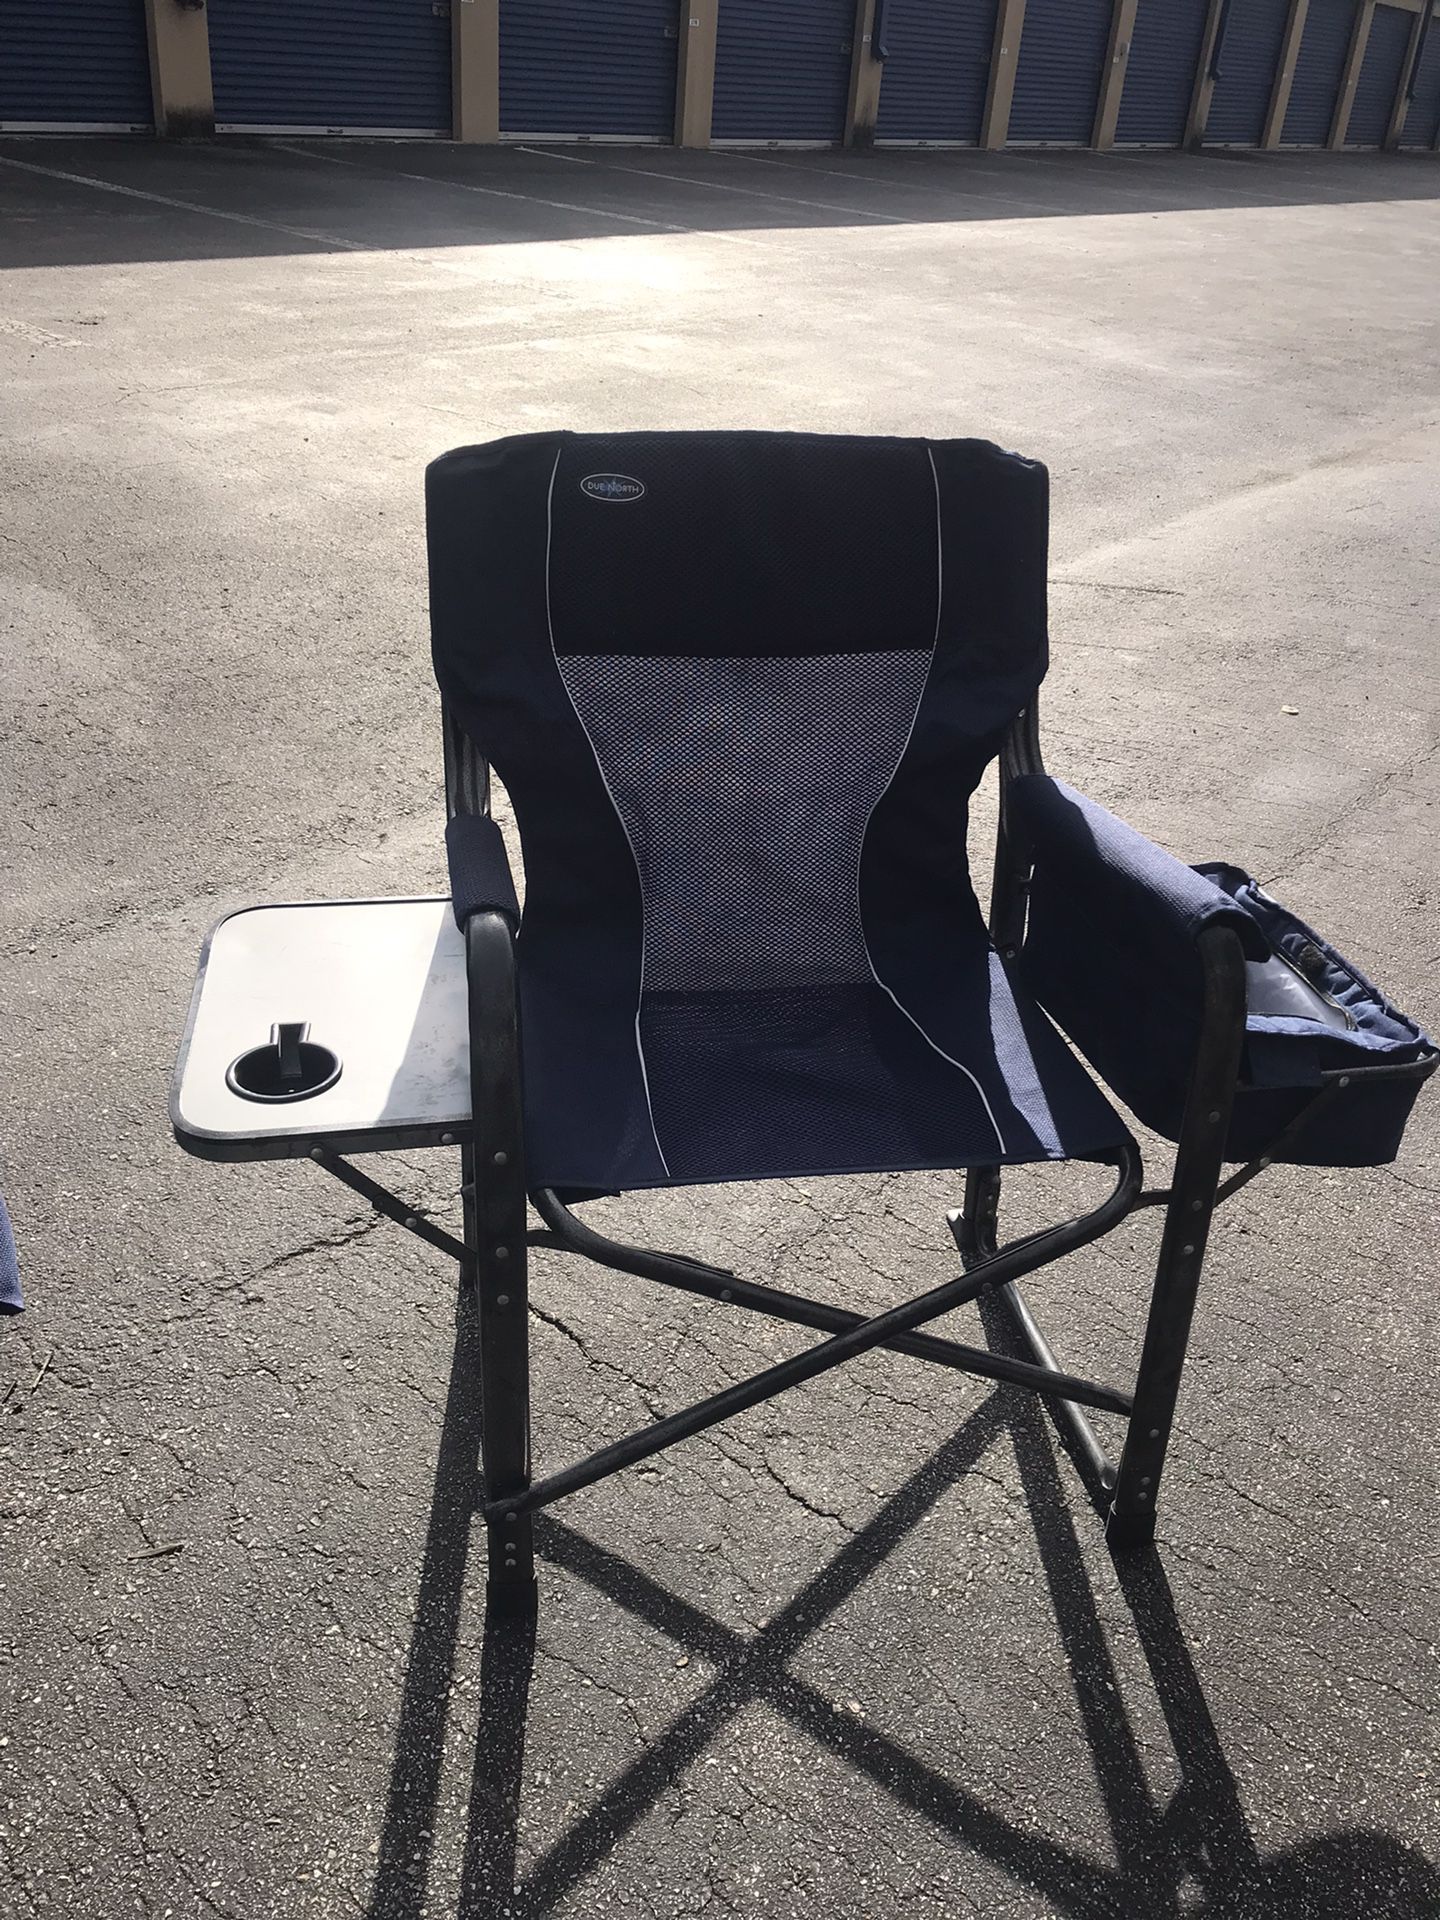 DUE NORTH Powder Coated Folding Camping Chairs, Heavy Duty with side table cup holder and cooler